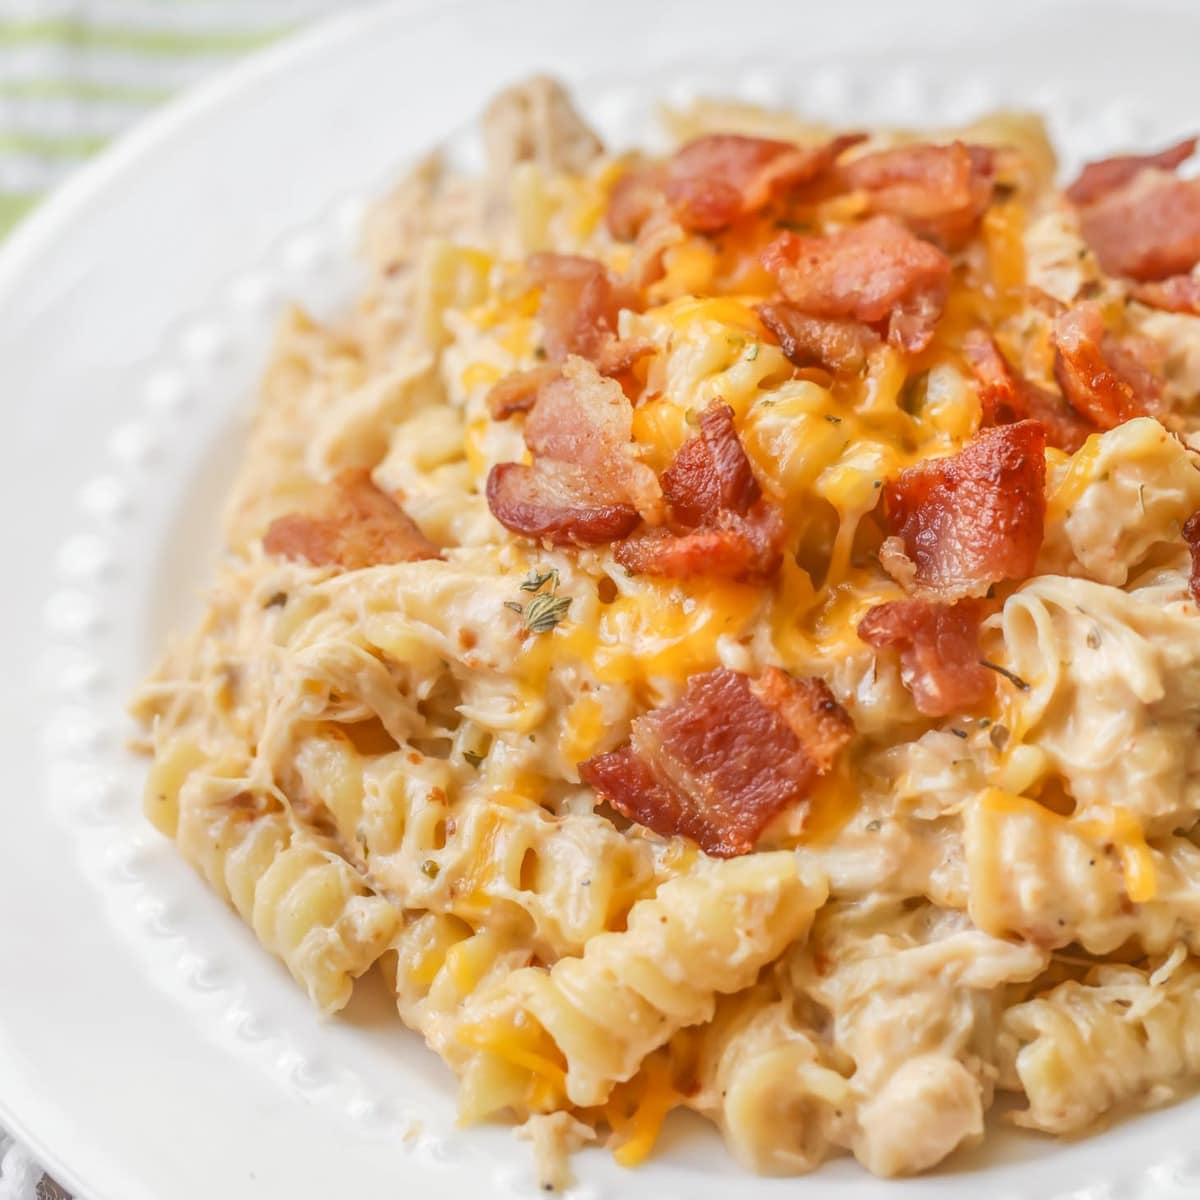 Chicken Pasta Recipes - Chicken bacon ranch pasta served on a white plate.